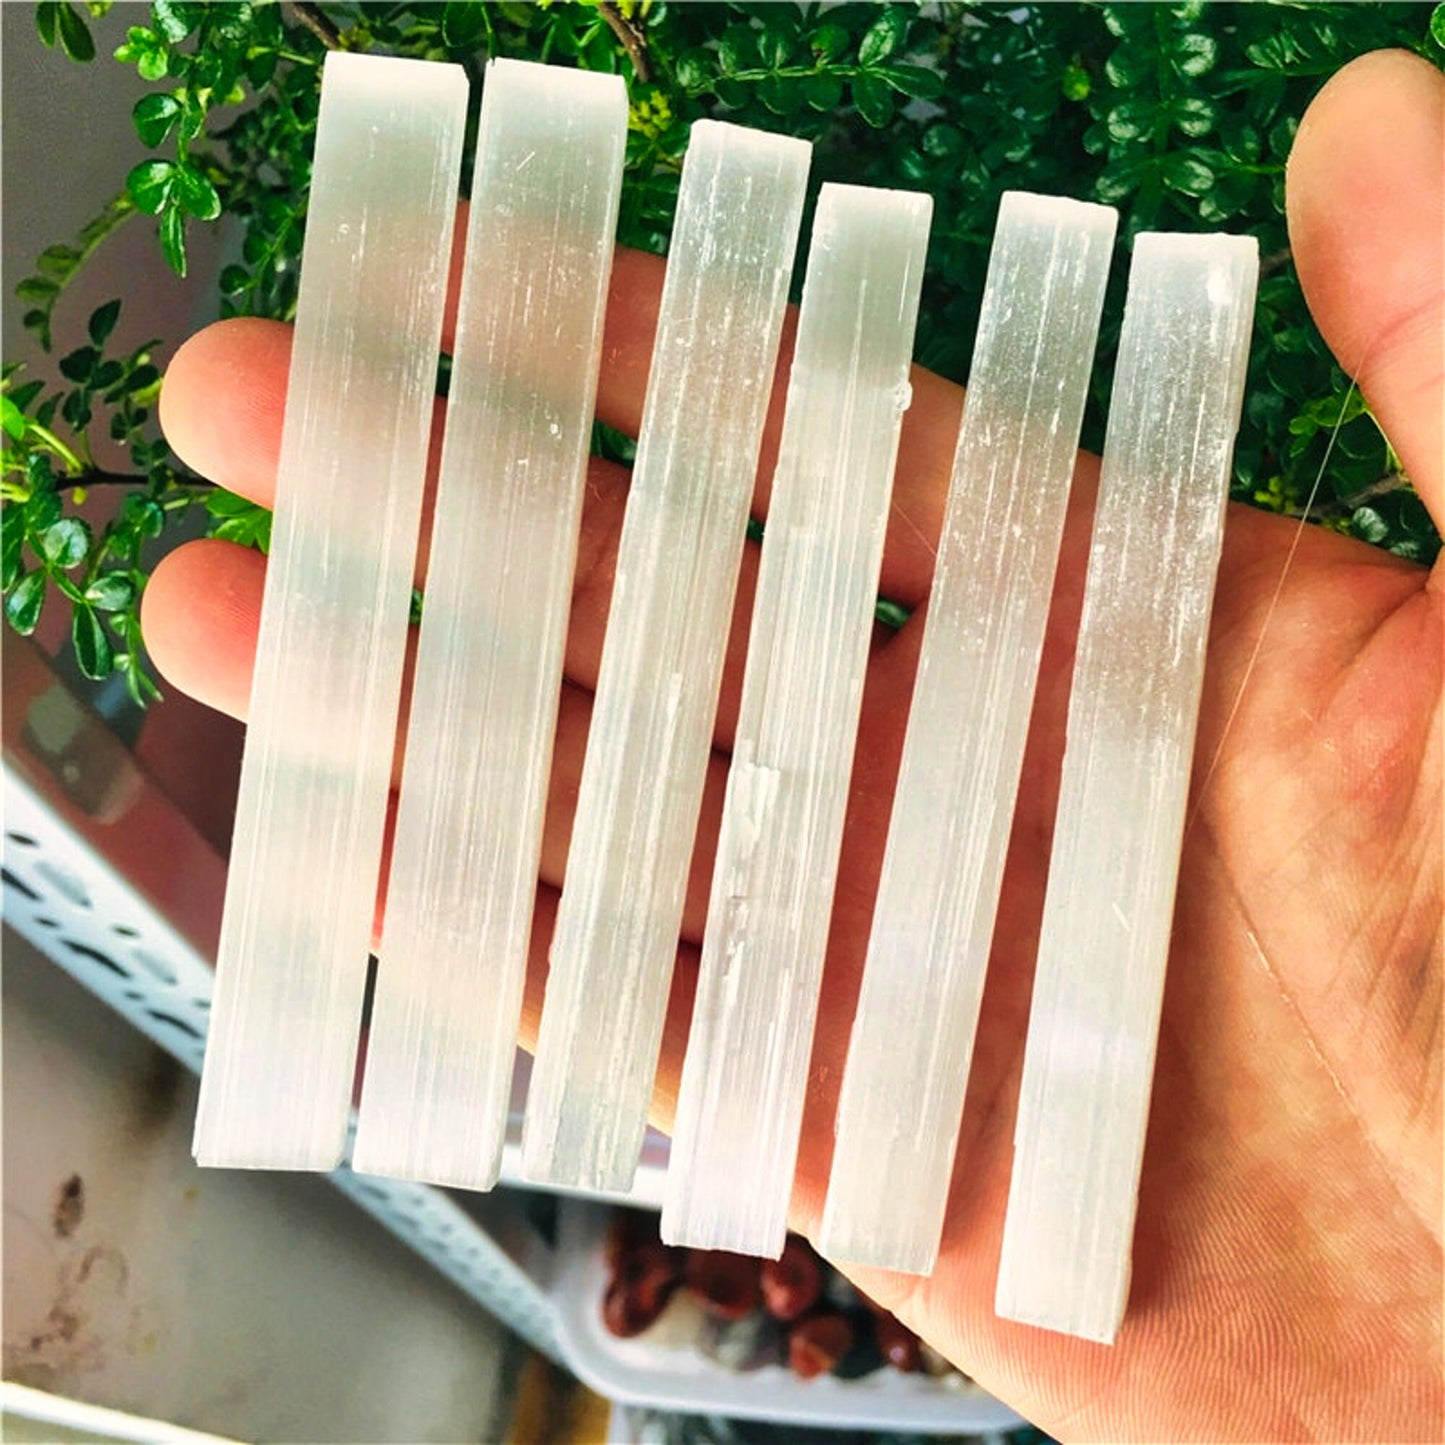 Natural Selenite Quartz Crystal Sticks - 9-10cm, Cleansing Crystal Chips and Stones for Air Purification - Minerals Specimen